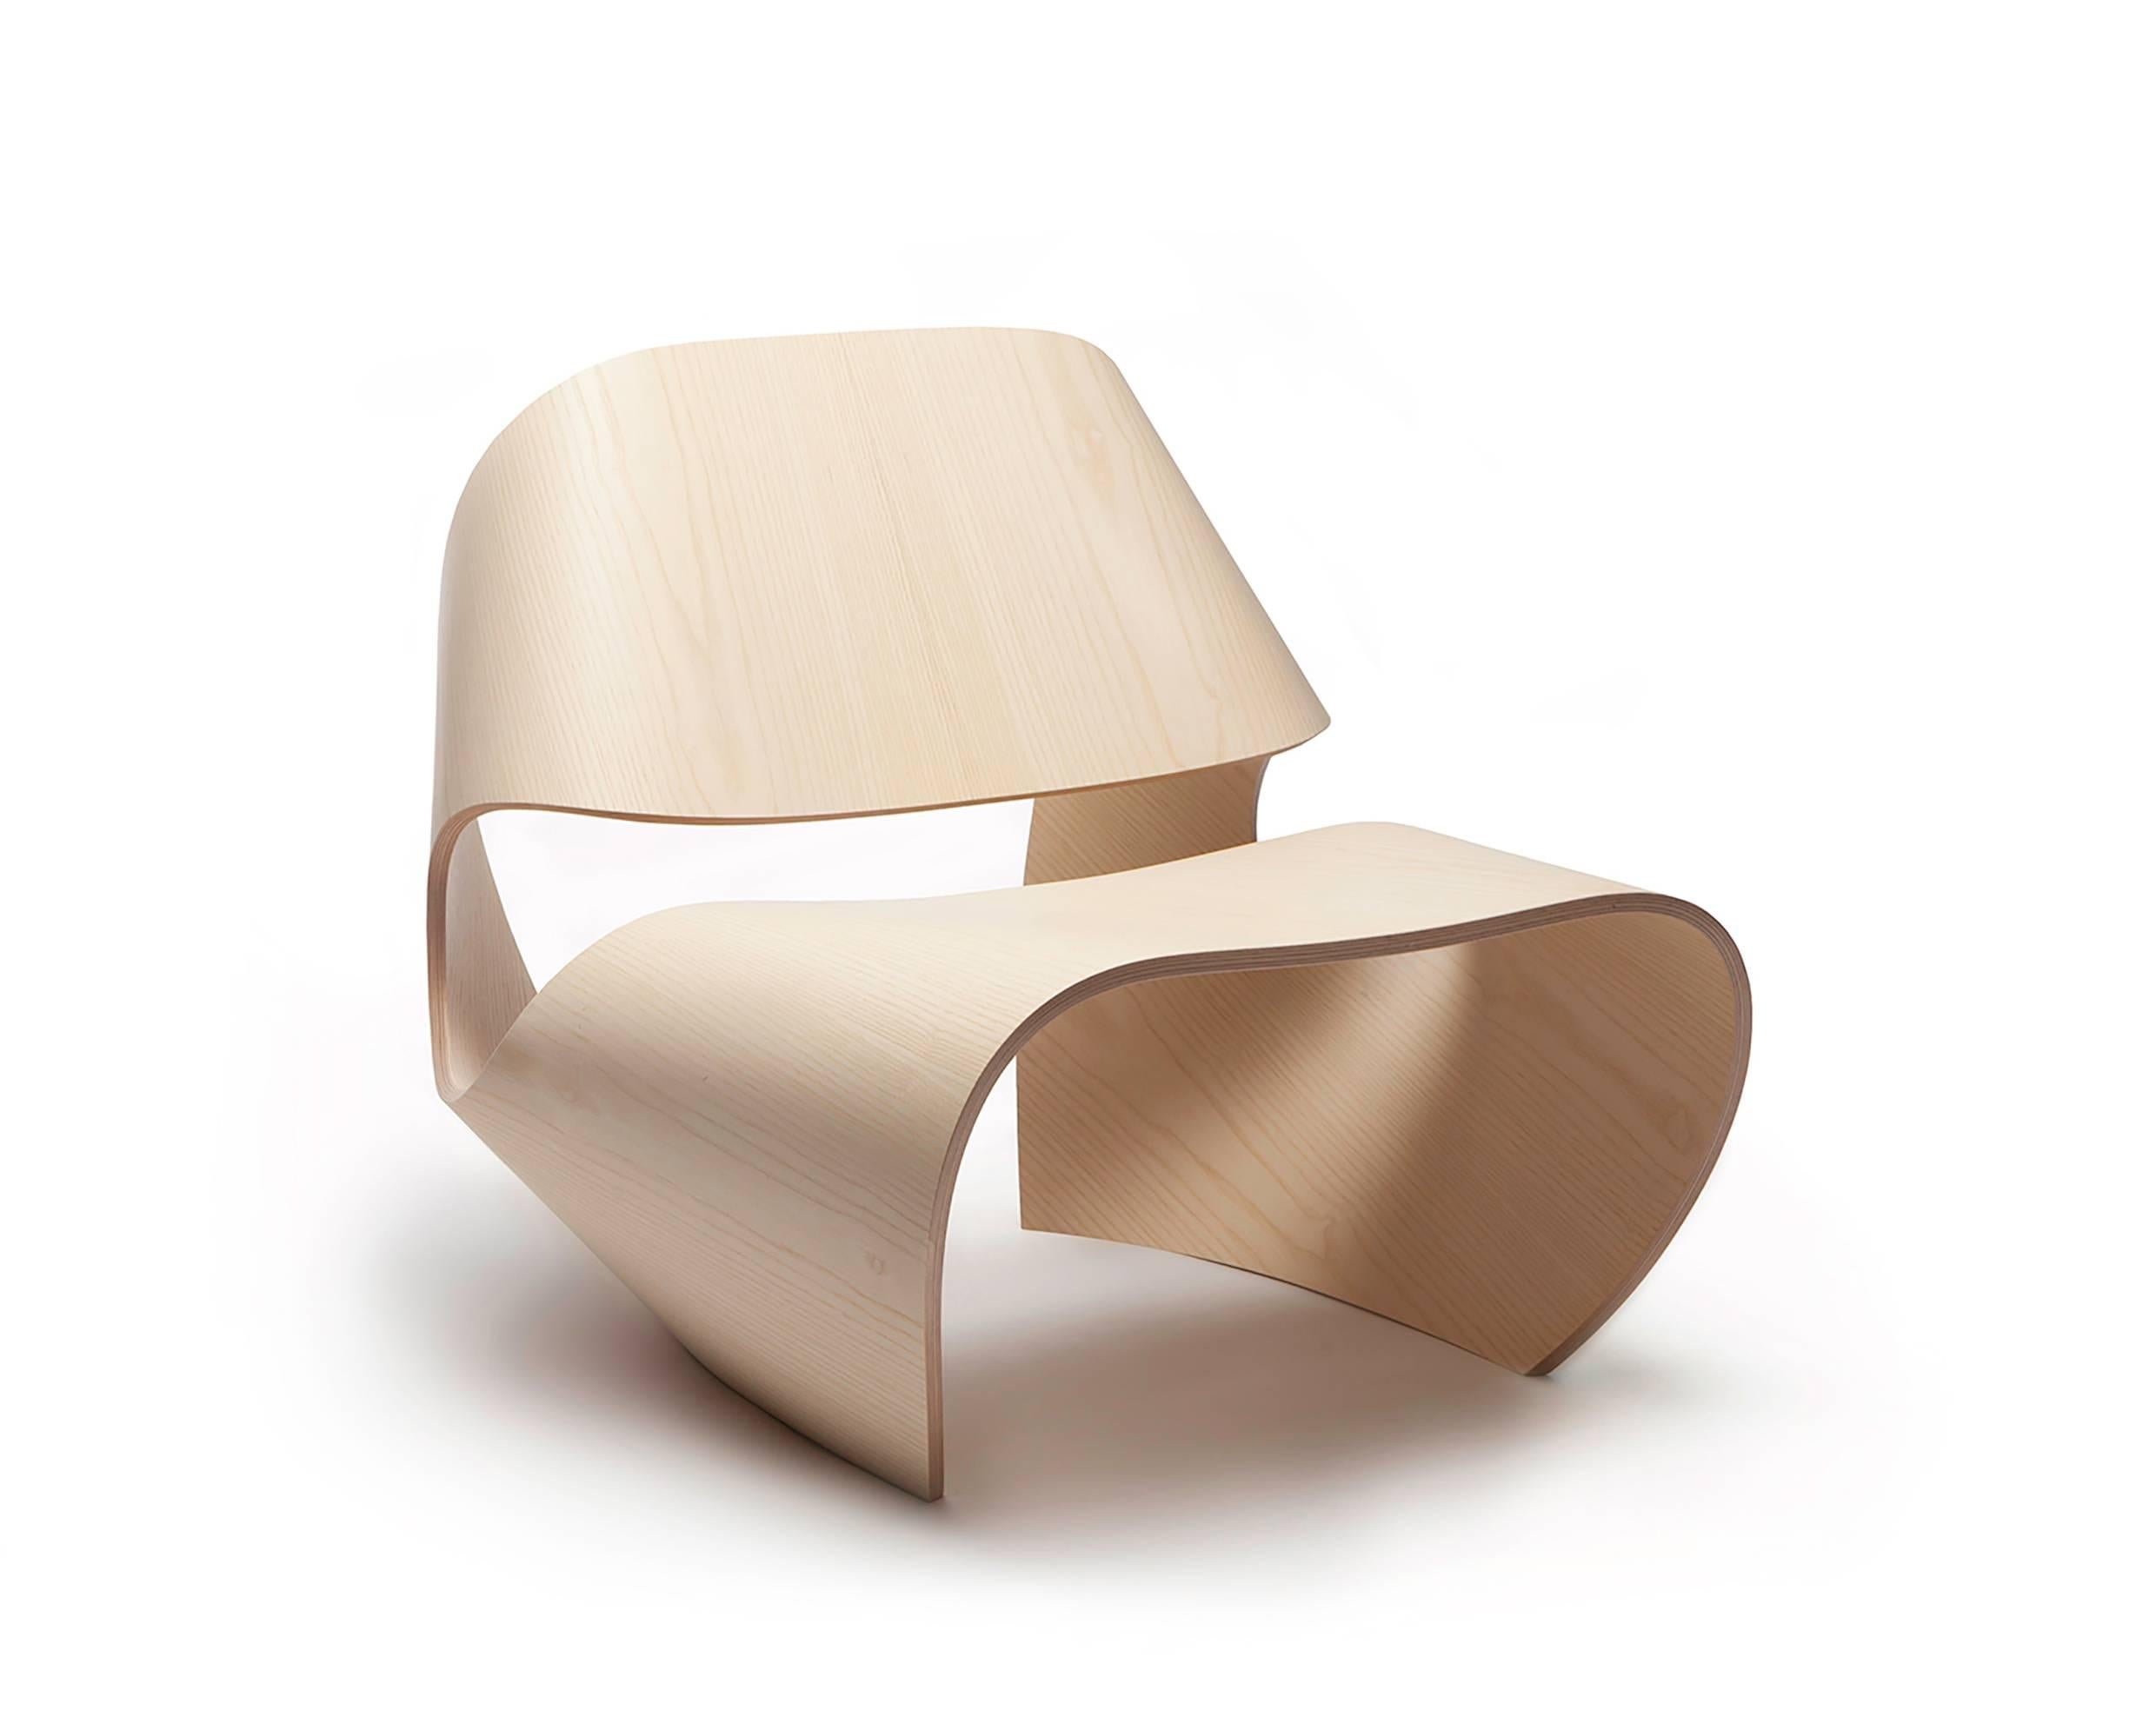 bent plywood chair